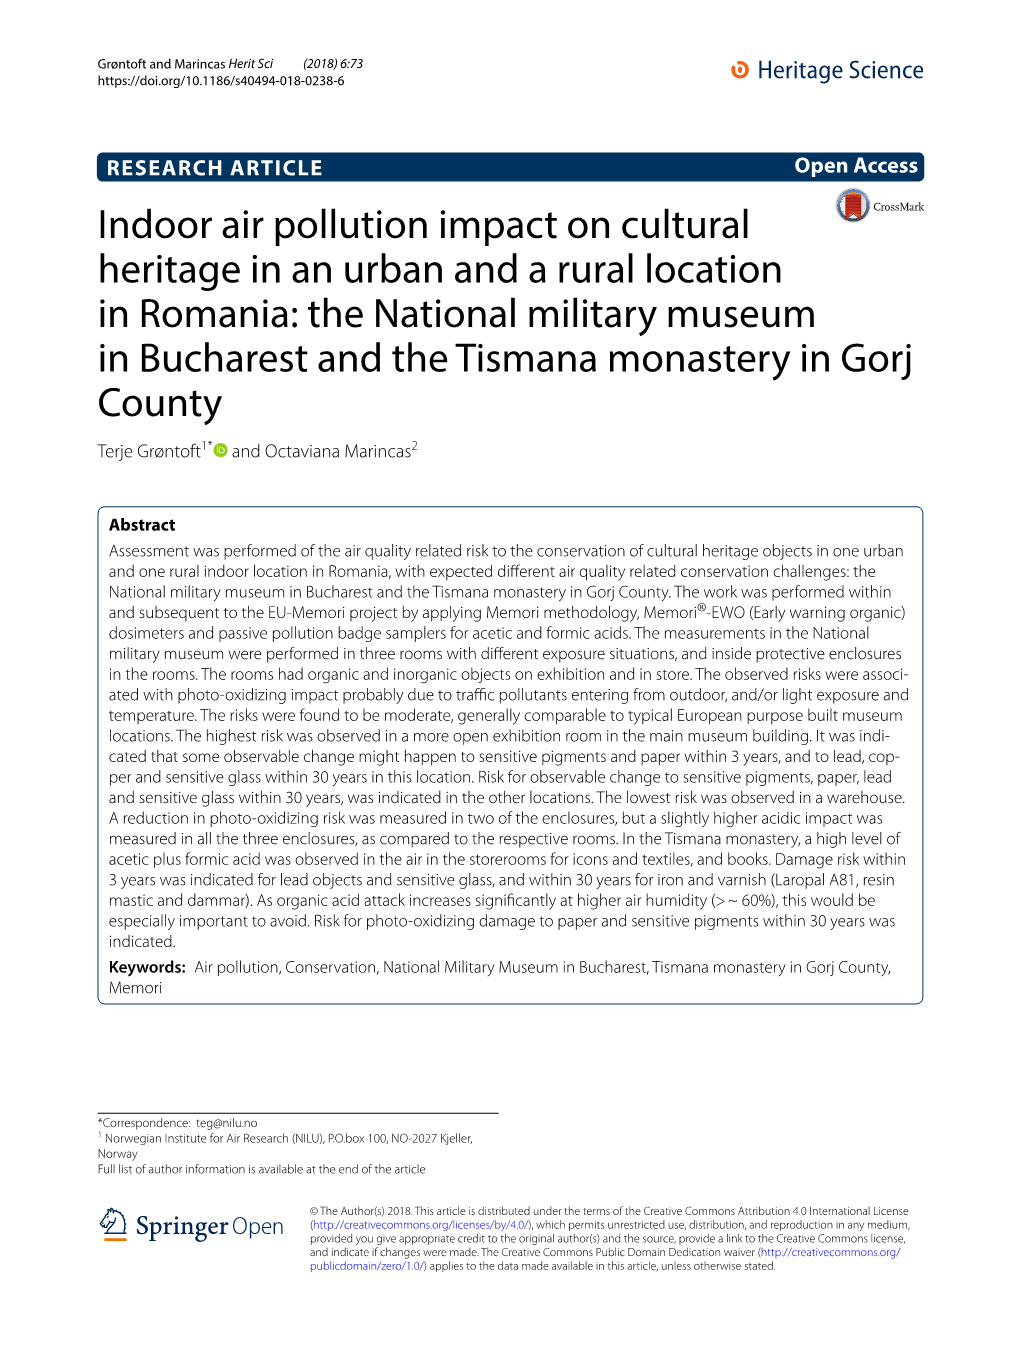 Indoor Air Pollution Impact on Cultural Heritage in an Urban and a Rural Location in Romania: the National Military Museum in Bu